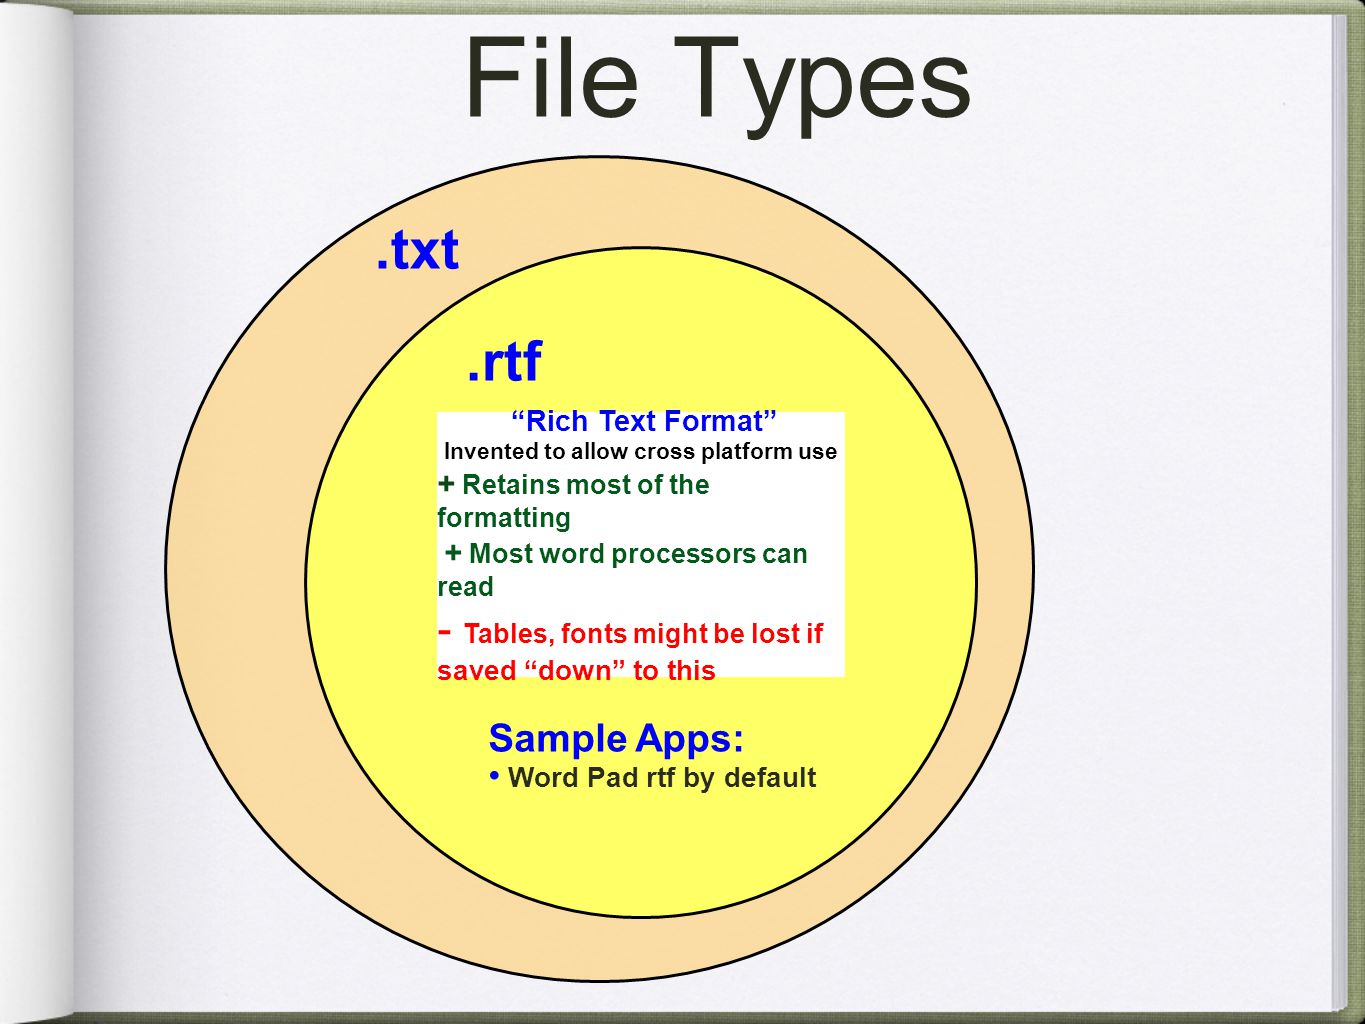 File Types.txt Sample Apps: Notepad TextEdit Stickies + Opens immediately + Every word processor in the world can read it - No formatting available.txt.rtf Rich Text Format Invented to allow cross platform use + Retains most of the formatting + Most word processors can read - Tables, fonts might be lost if saved down to this Sample Apps: Word Pad rtf by default